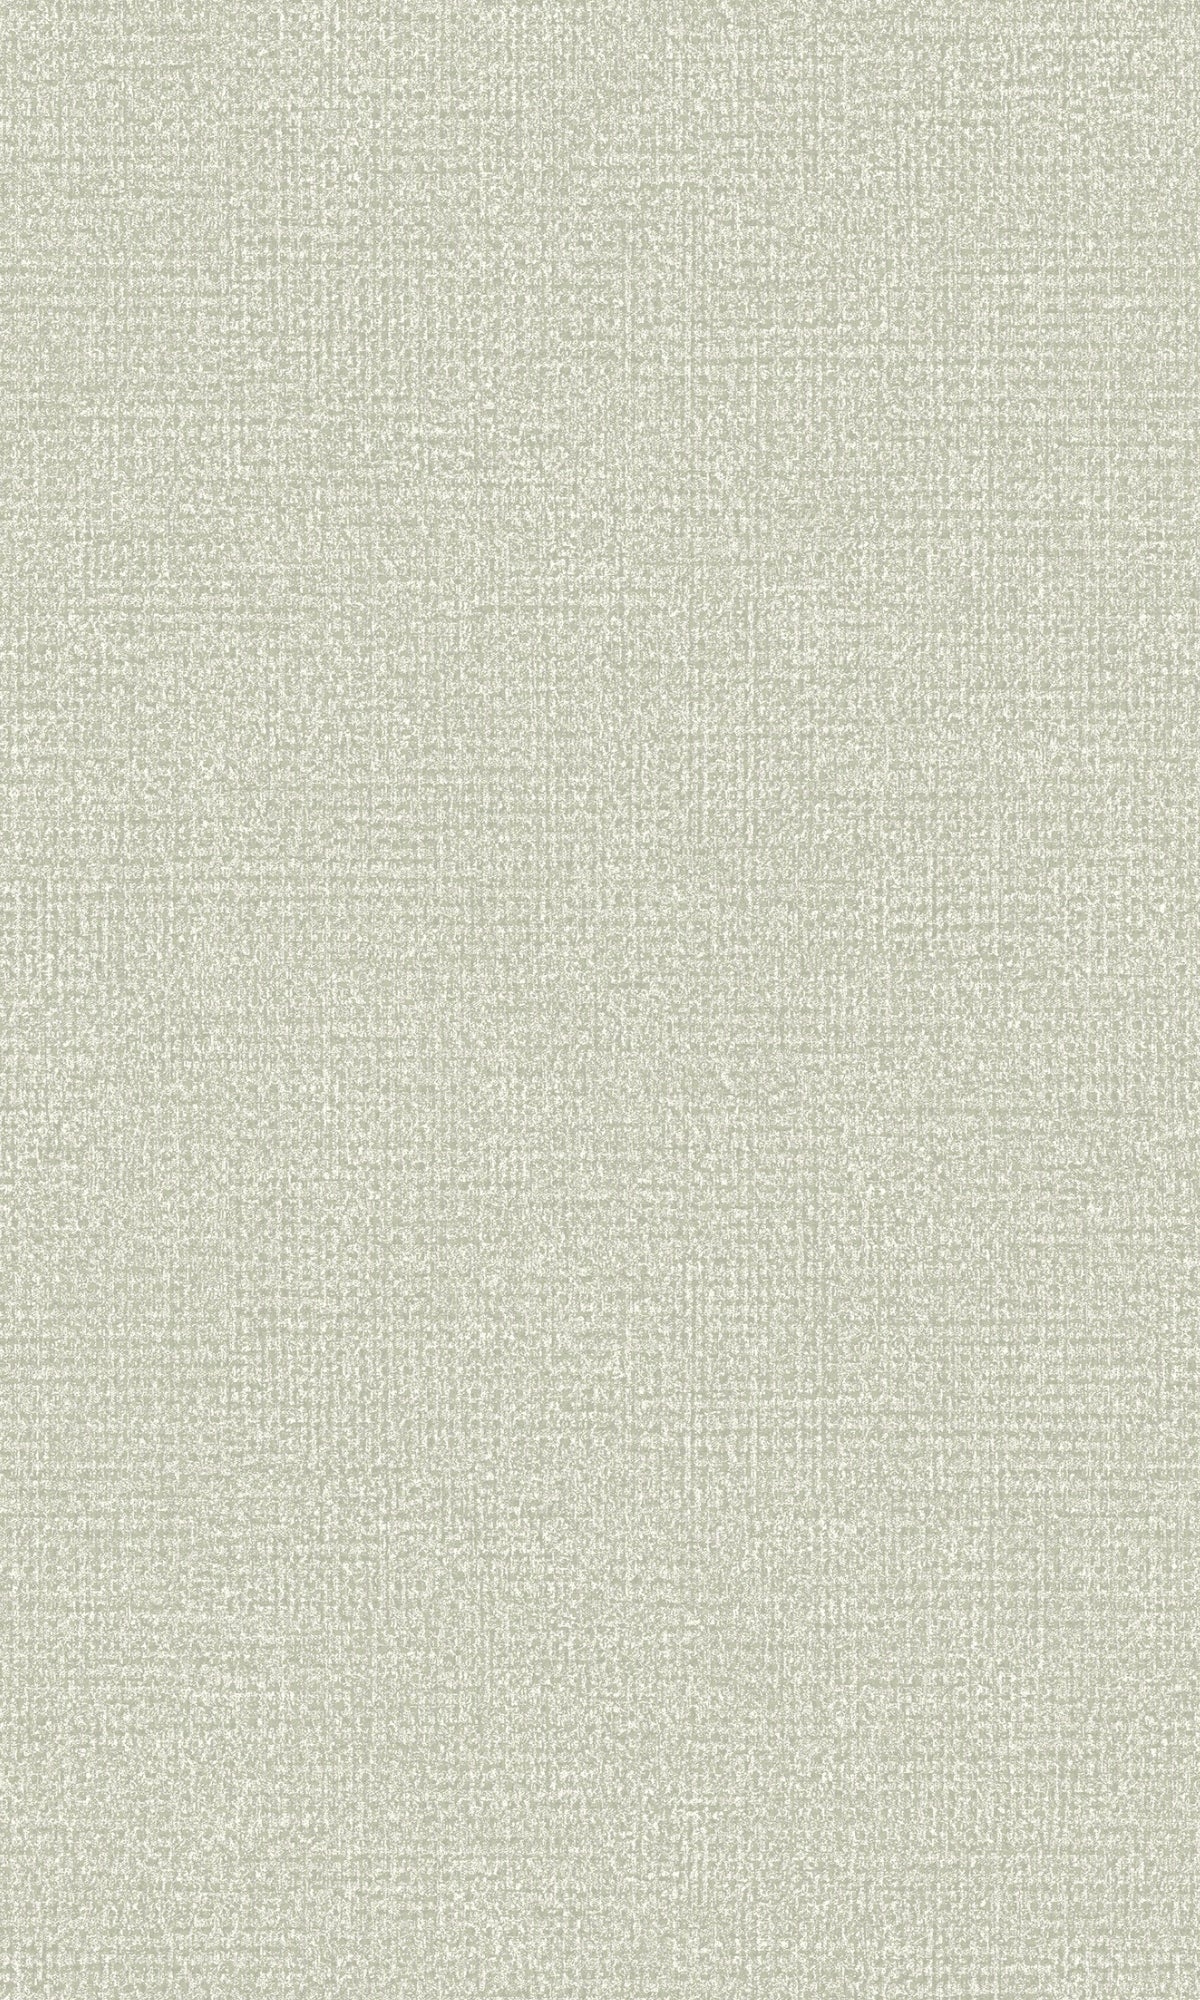 Forest Plain Fabric Like Textured Wallpaper R8166